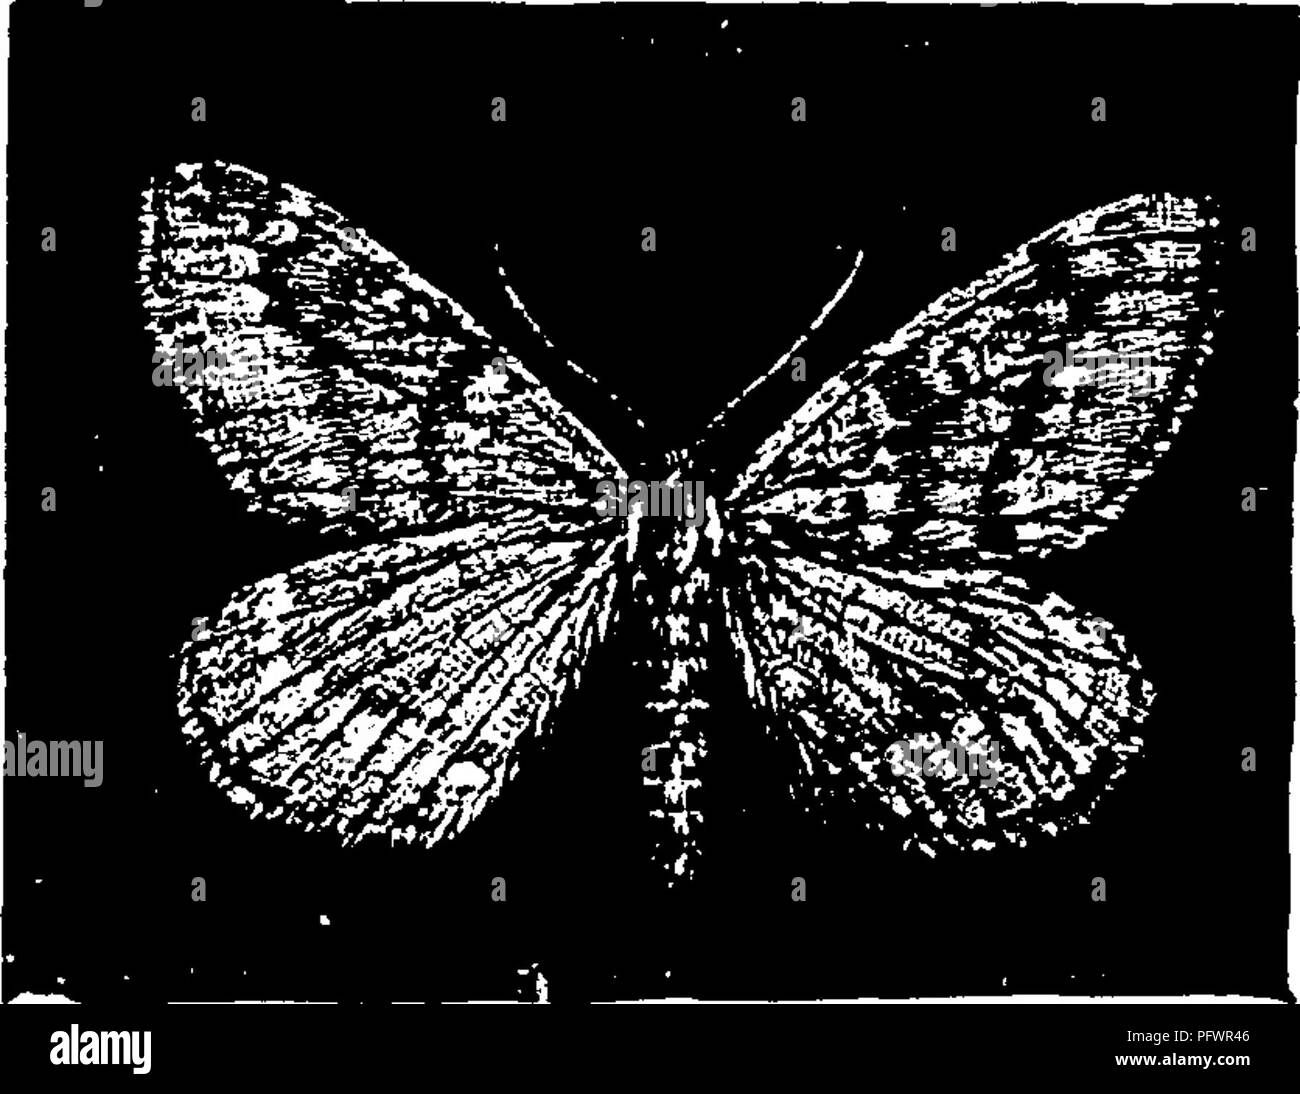 . A manual for the study of insects. Insects. 2/6 THE STUDY OF INSECTS, no prolegs on the fifth abdominal segment. The pupa state is passed below the surface of the ground in a simple earthen cell, which is lined with very few silken threads. The adult moths usually emerge early in the spring before the leaves expand ; but they sometimes appear late in the fall, or on warm days during the winter when the ground is thawed. In both sexes the adult of this species is distinguished by the presence of two transverse rows of stiff reddish spines, pointing backwards, on each of the first seven abdomi Stock Photo